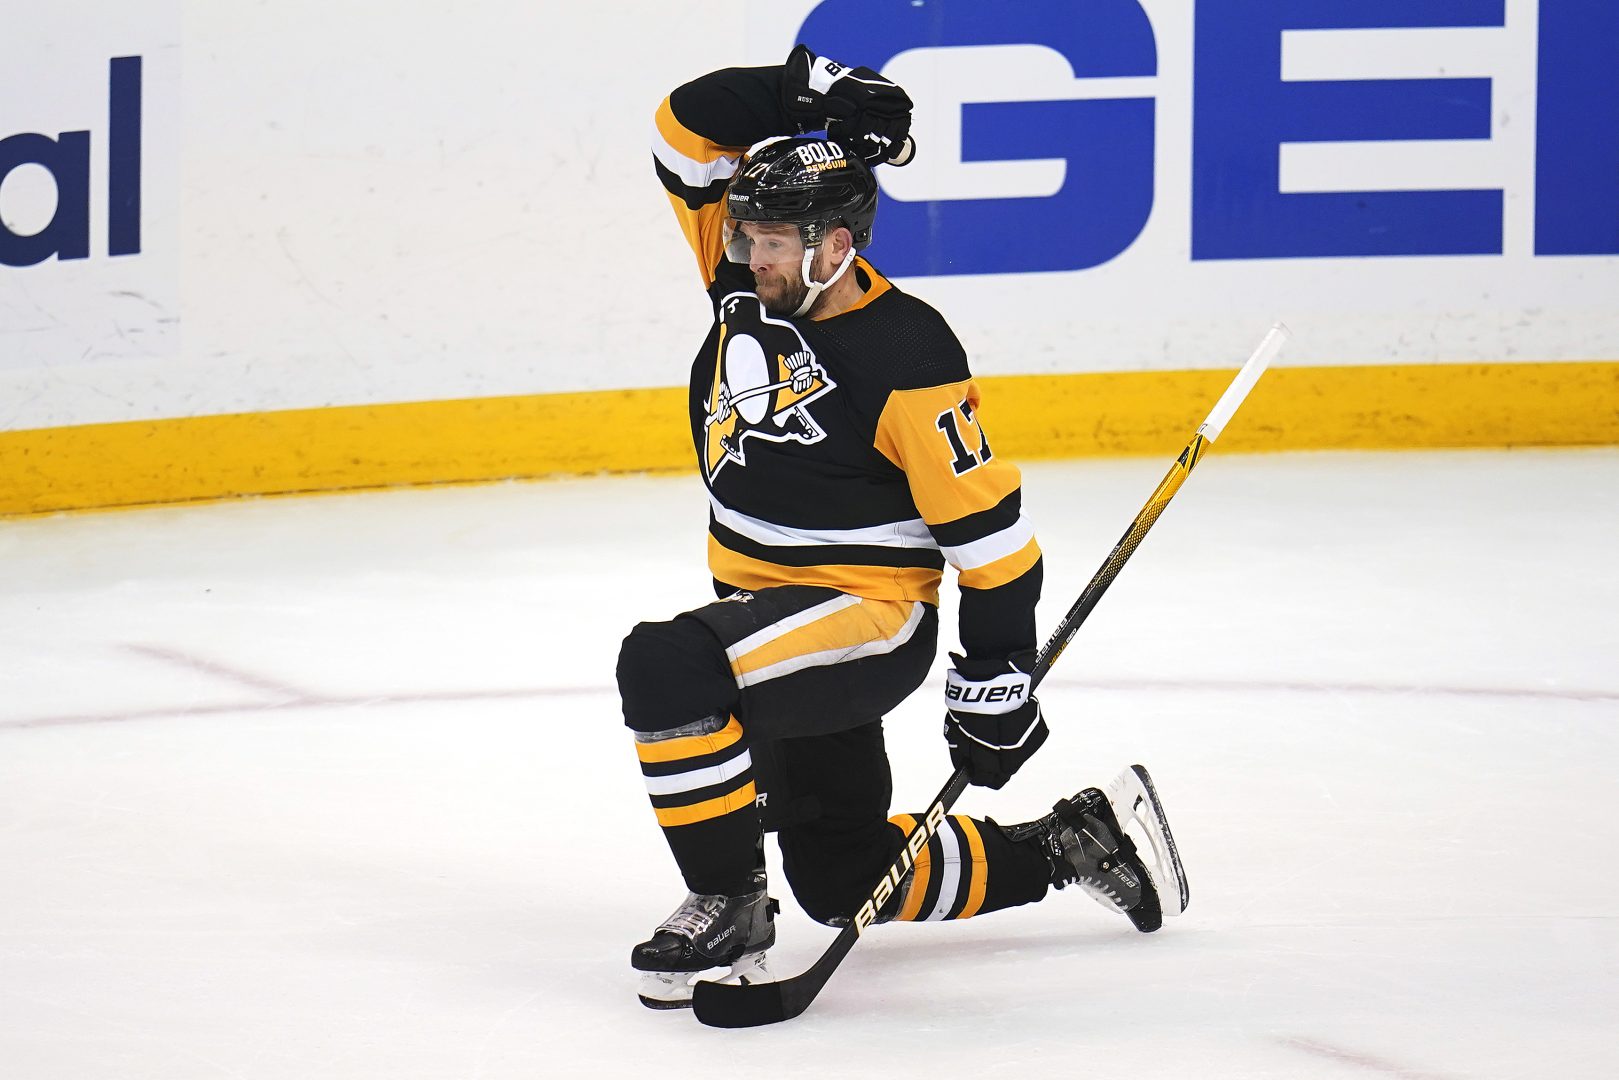 Pittsburgh Penguins' Bryan Rust celebrates his goal against the New York Rangers during the first period in Game 6 of an NHL hockey Stanley Cup first-round playoff series in Pittsburgh, Friday, May 13, 2022. (AP Photo/Gene J. Puskar)